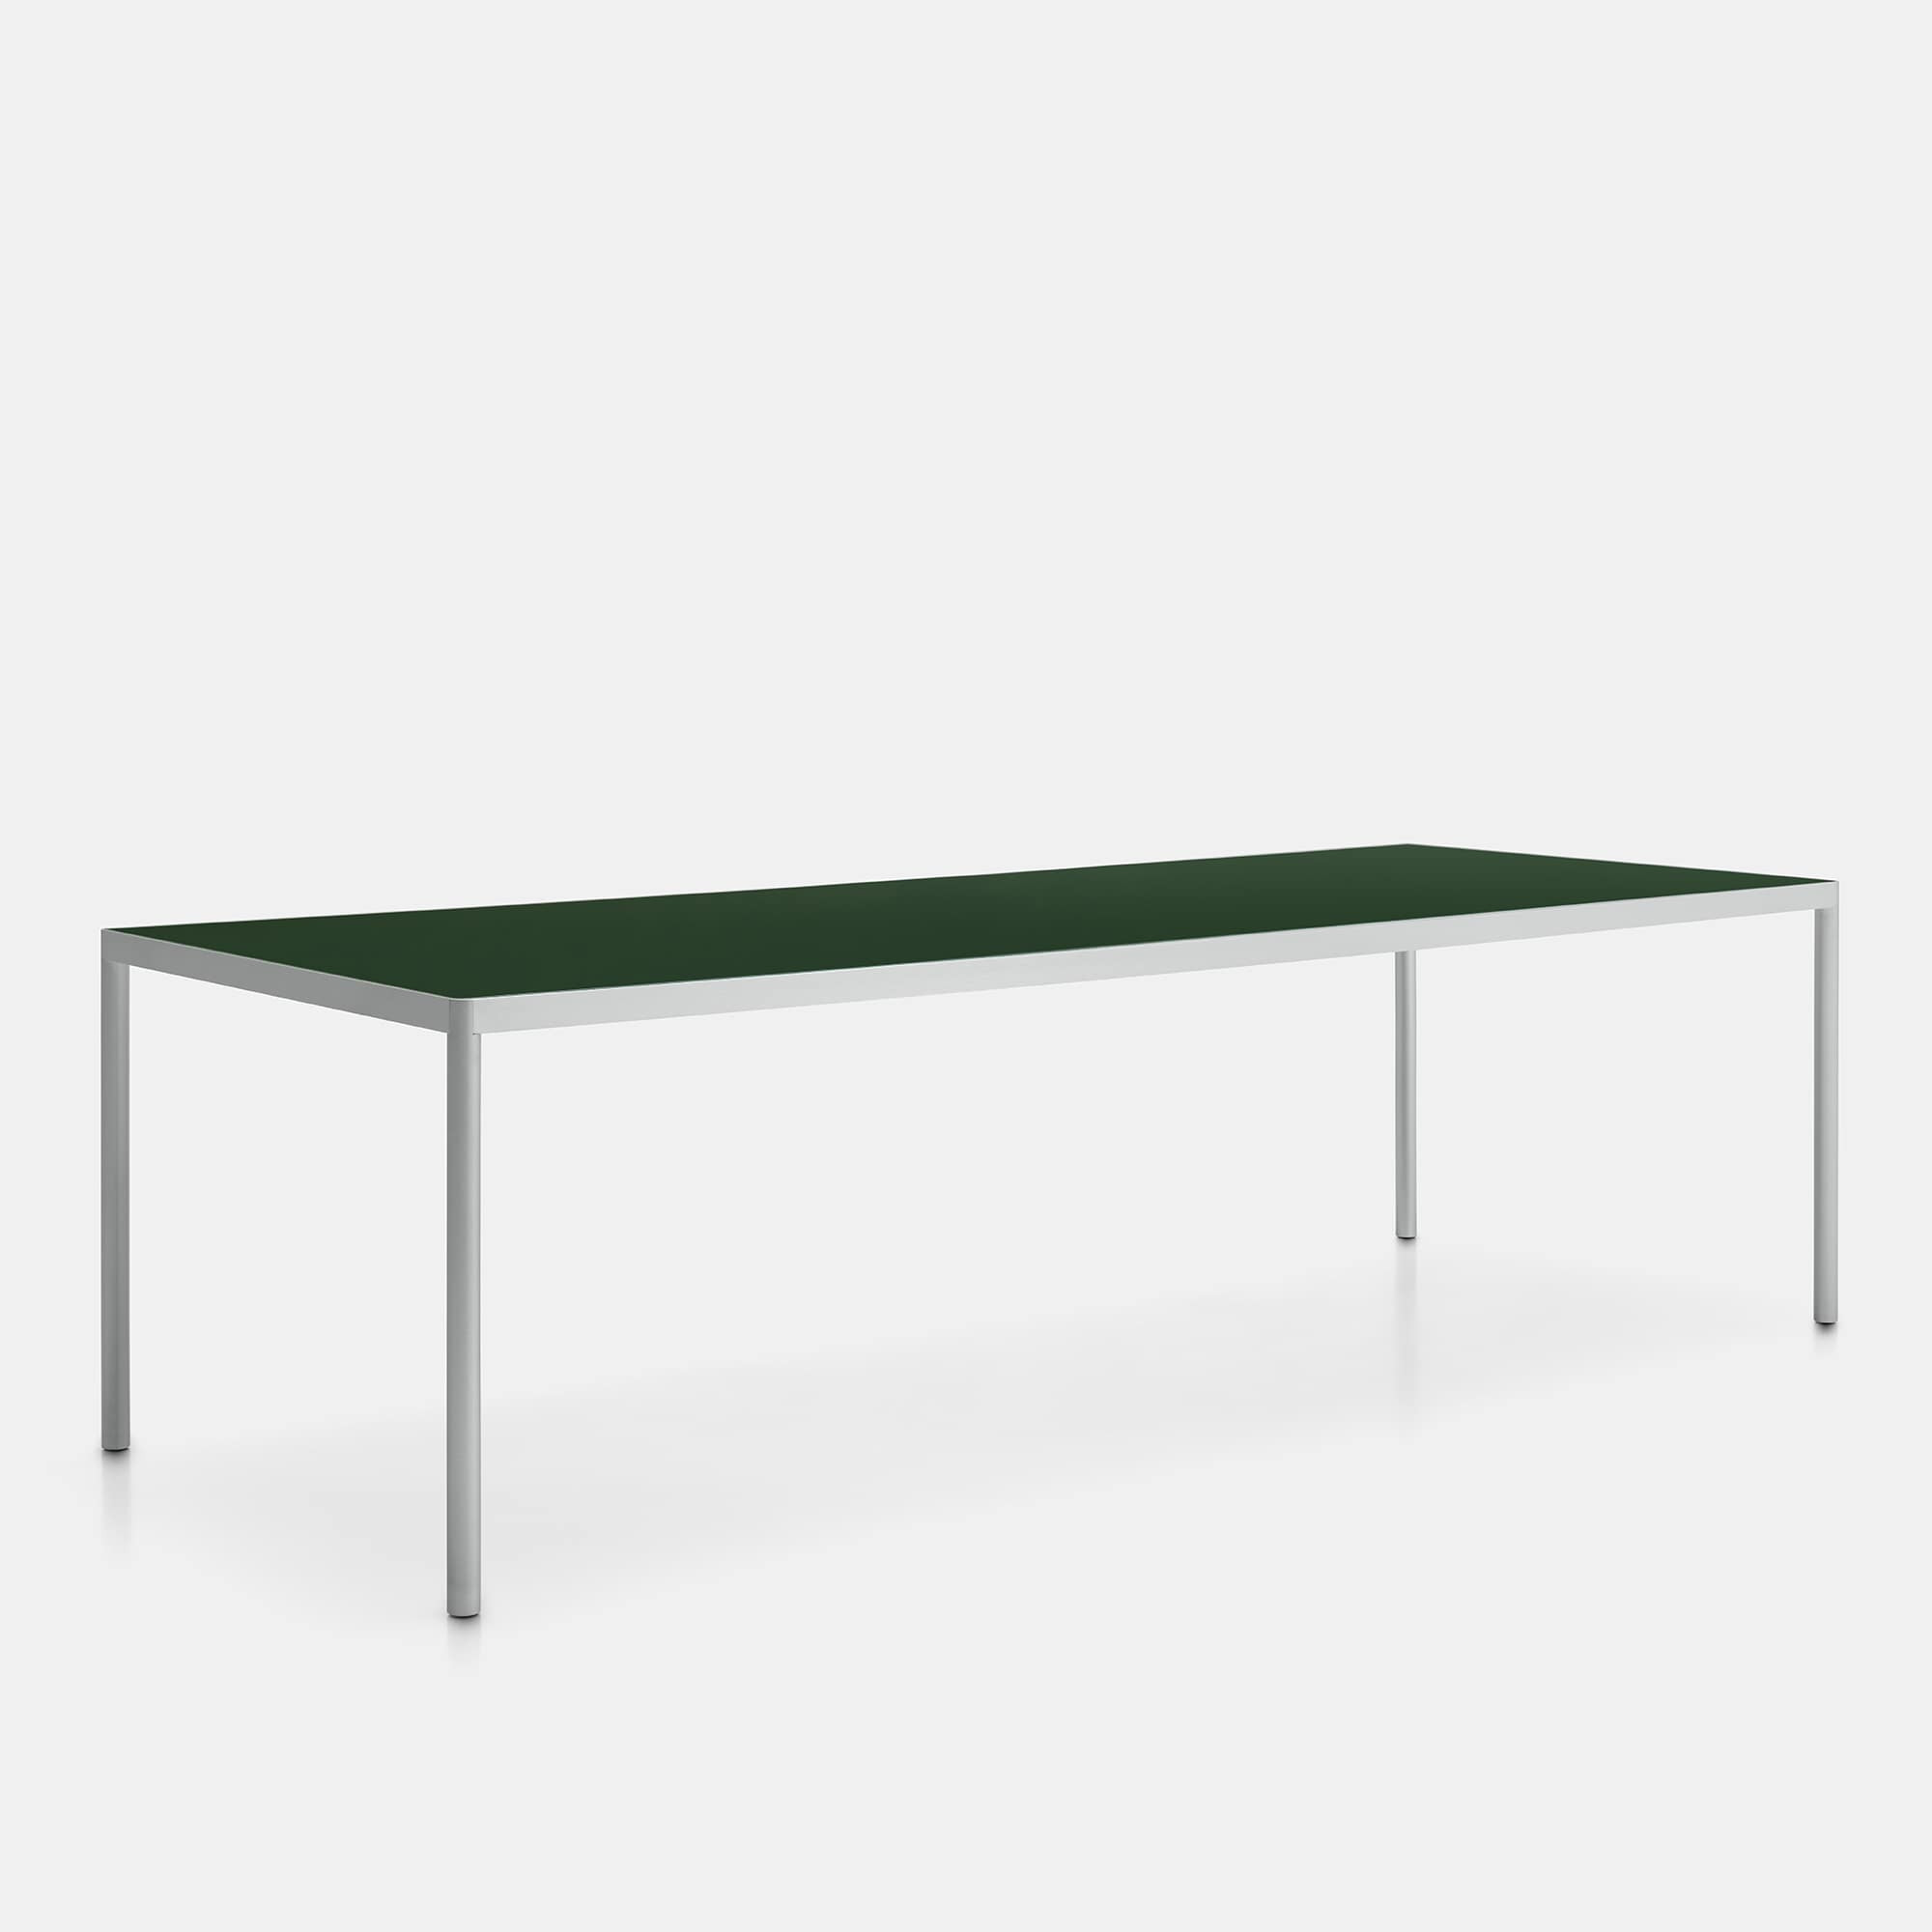 Offset Indoor / Outdoor Table ☞ Use: Indoor ☞ Structure: Brushed Anodised Aluminium X137 ☞ Top: English Green Back-Painted Glass X143